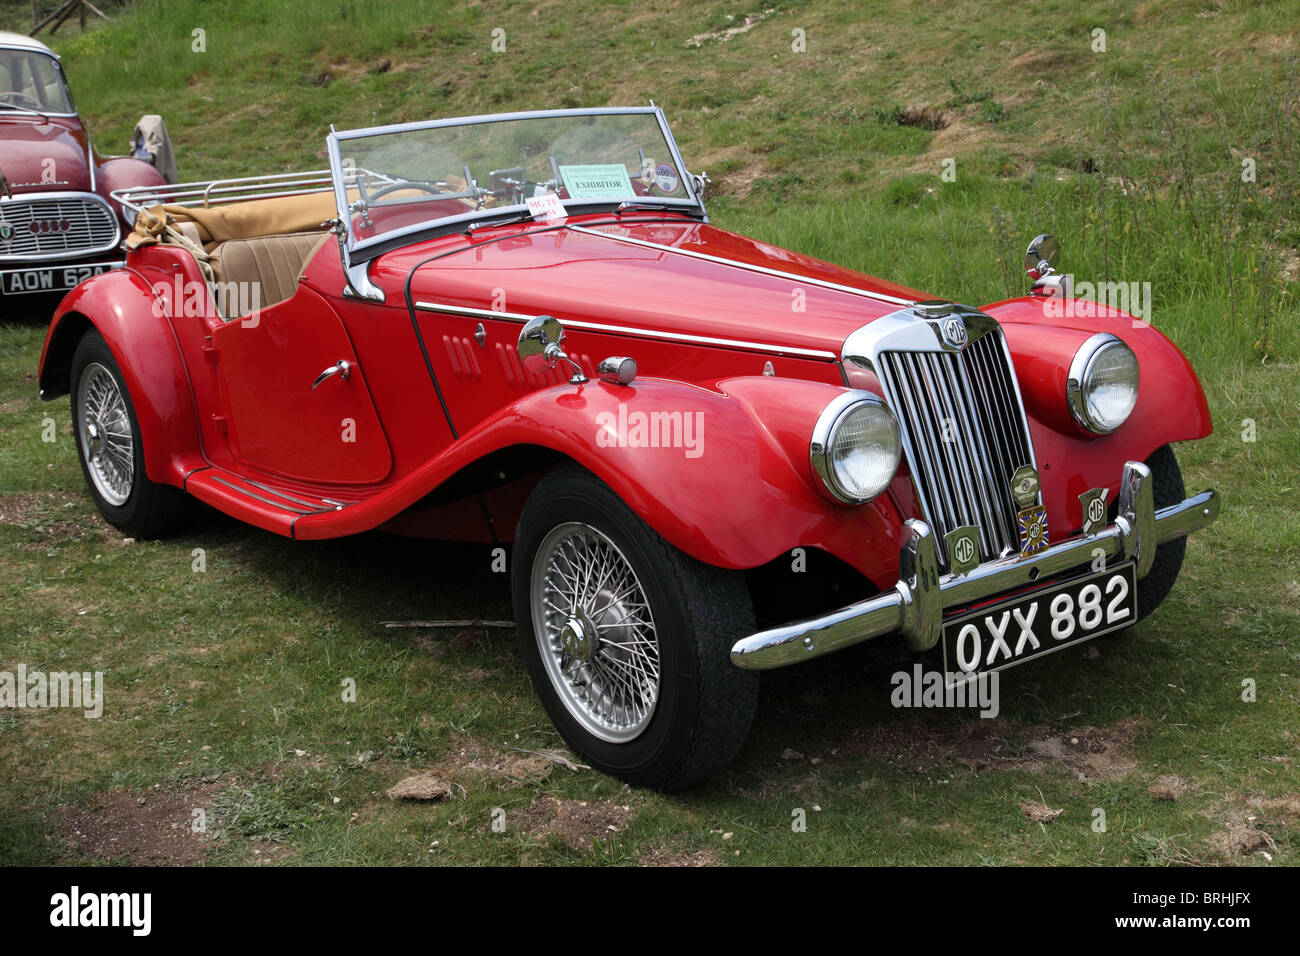 1954 MG TF classic car on display at Queen Elizabeth Country Park show June 2010 Stock Photo